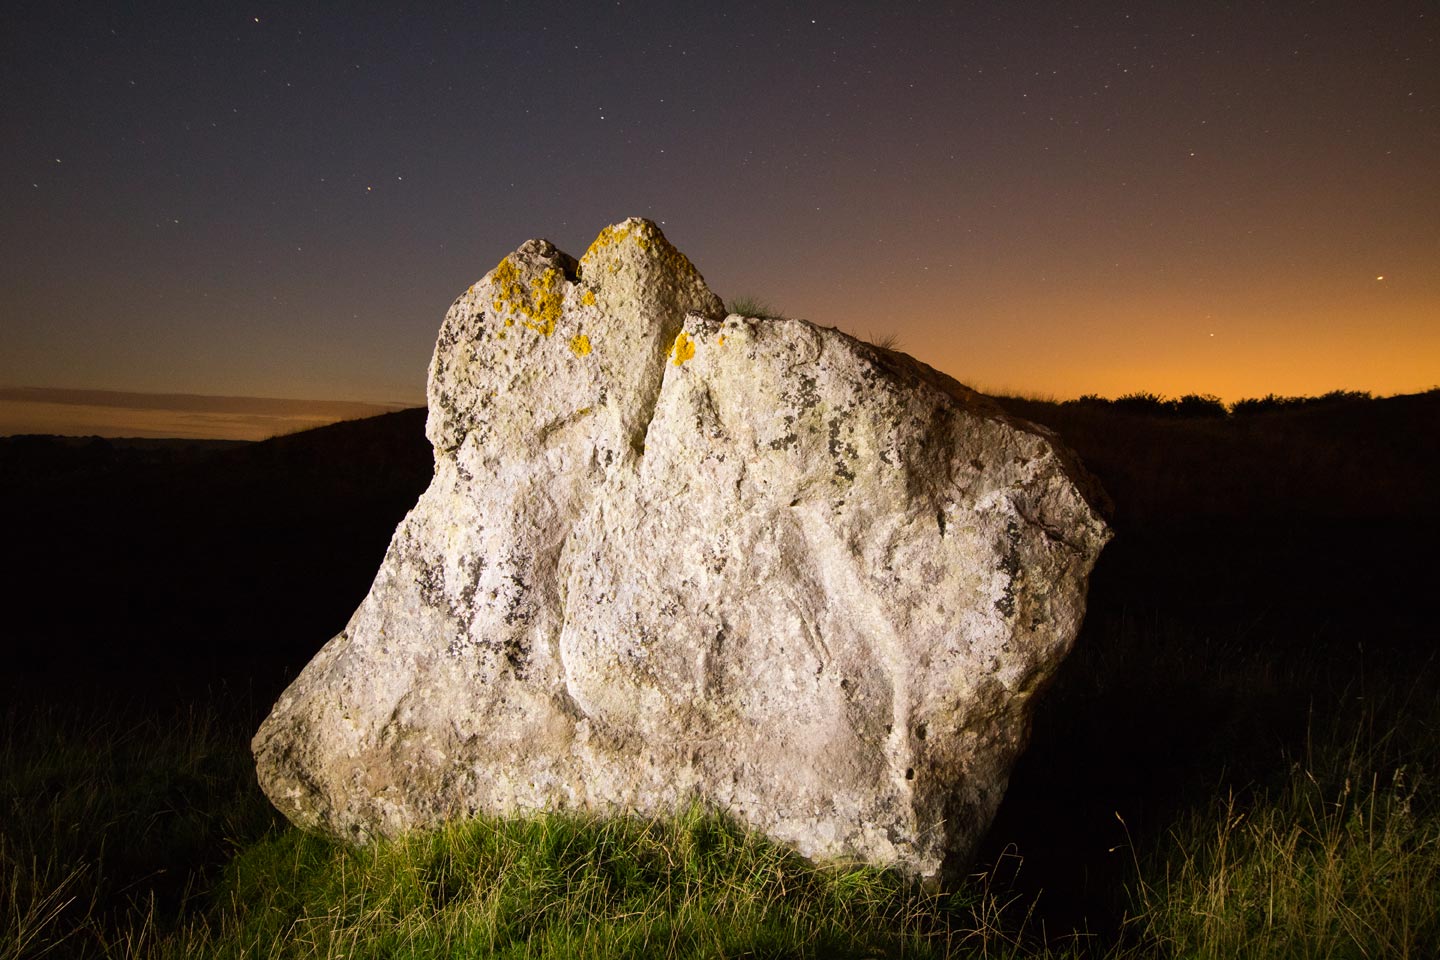 Night Photography Of A Neolithic Bull